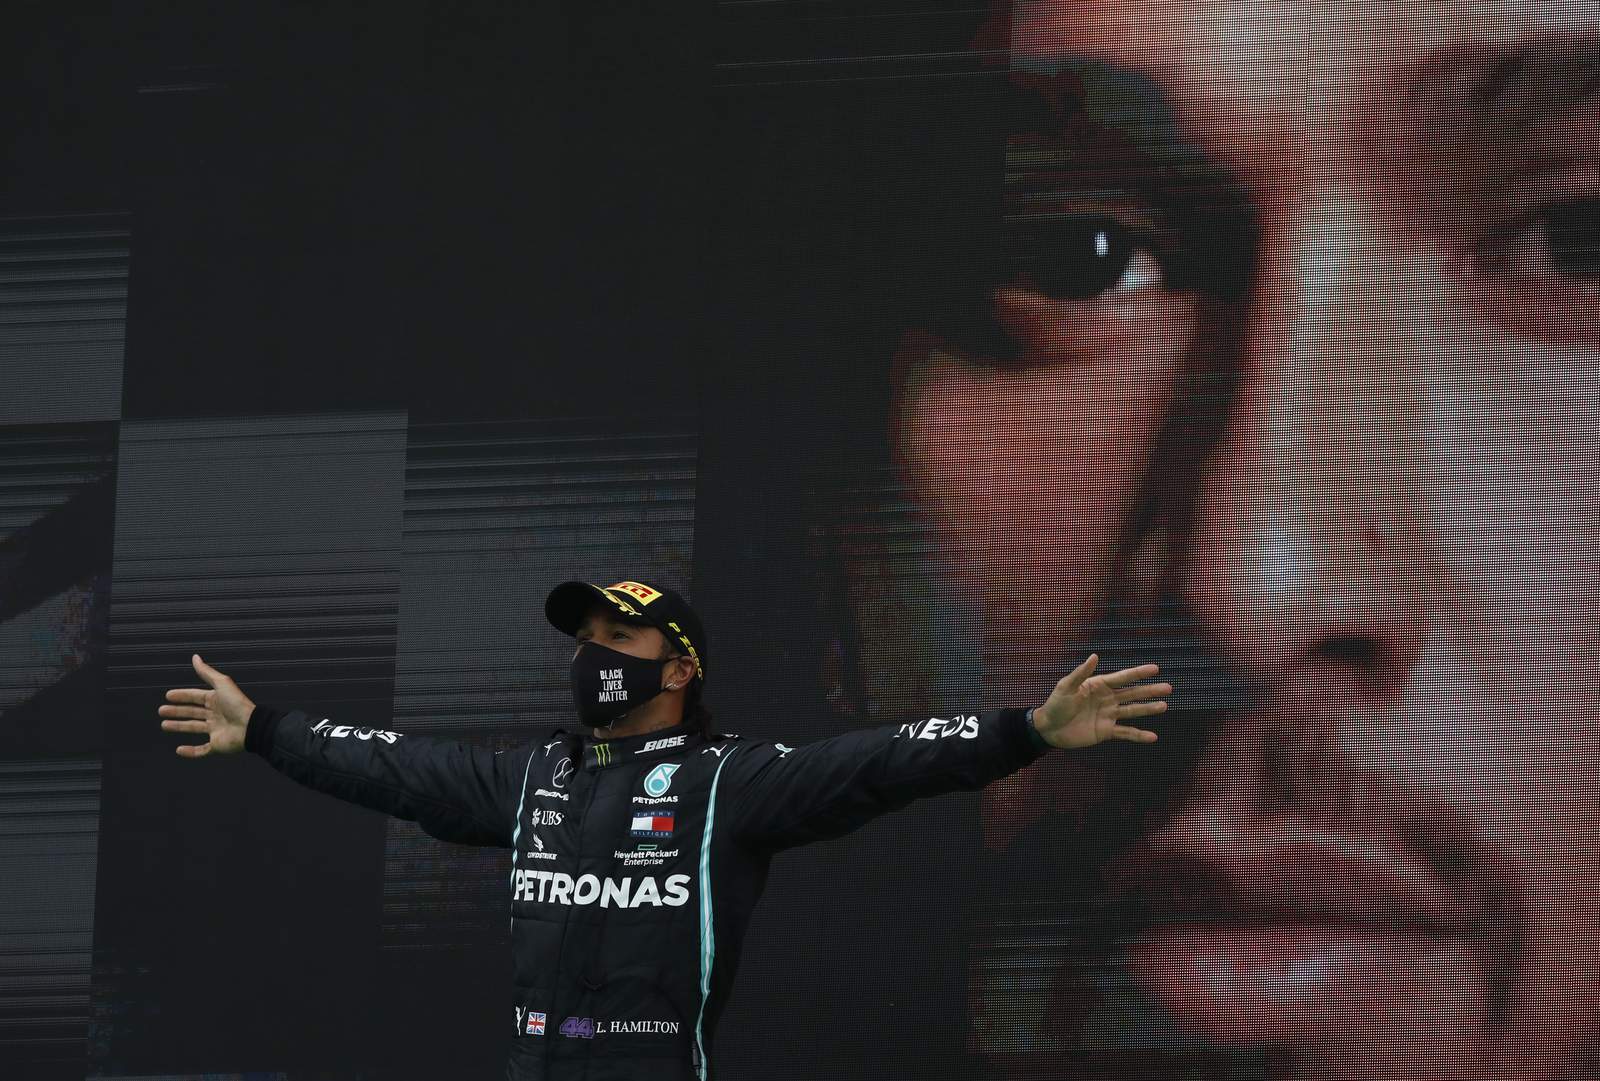 Still rising: Lewis Hamilton makes F1 history with 92nd win